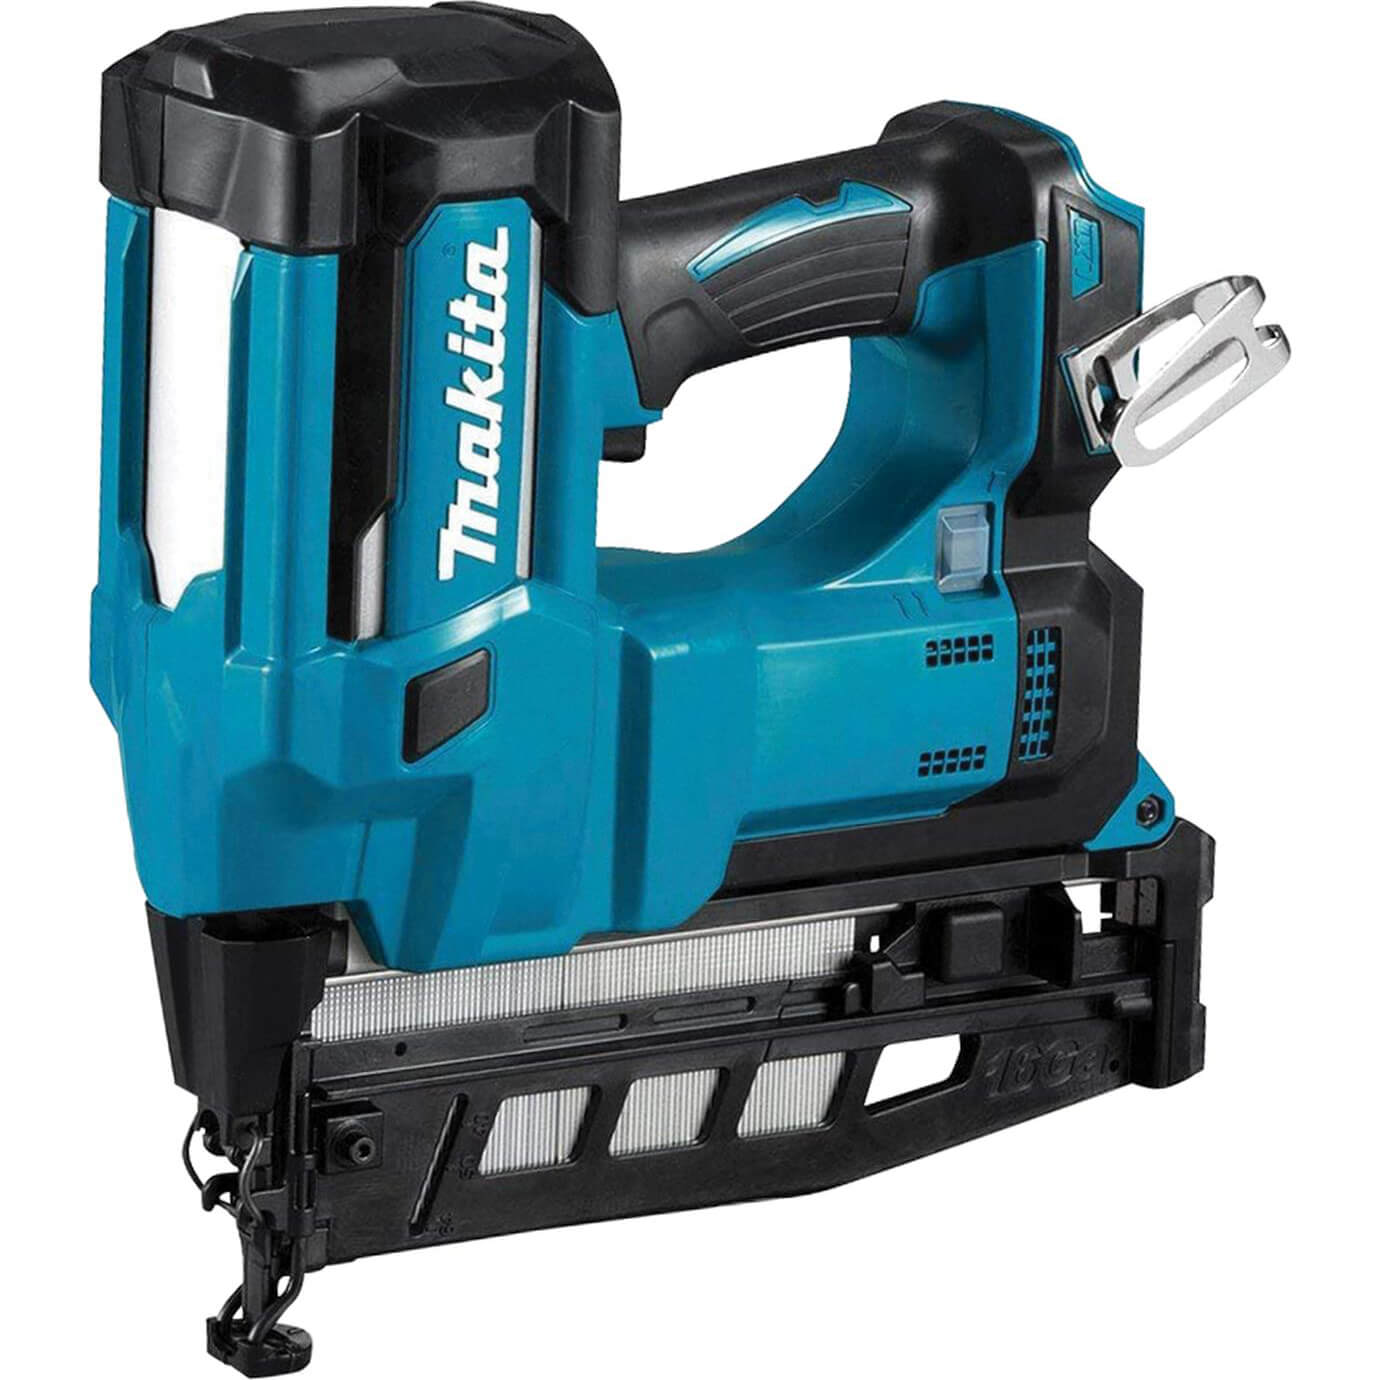 A great purchase! bosch 18v finish nailer Would need size 8 or maybe even 7